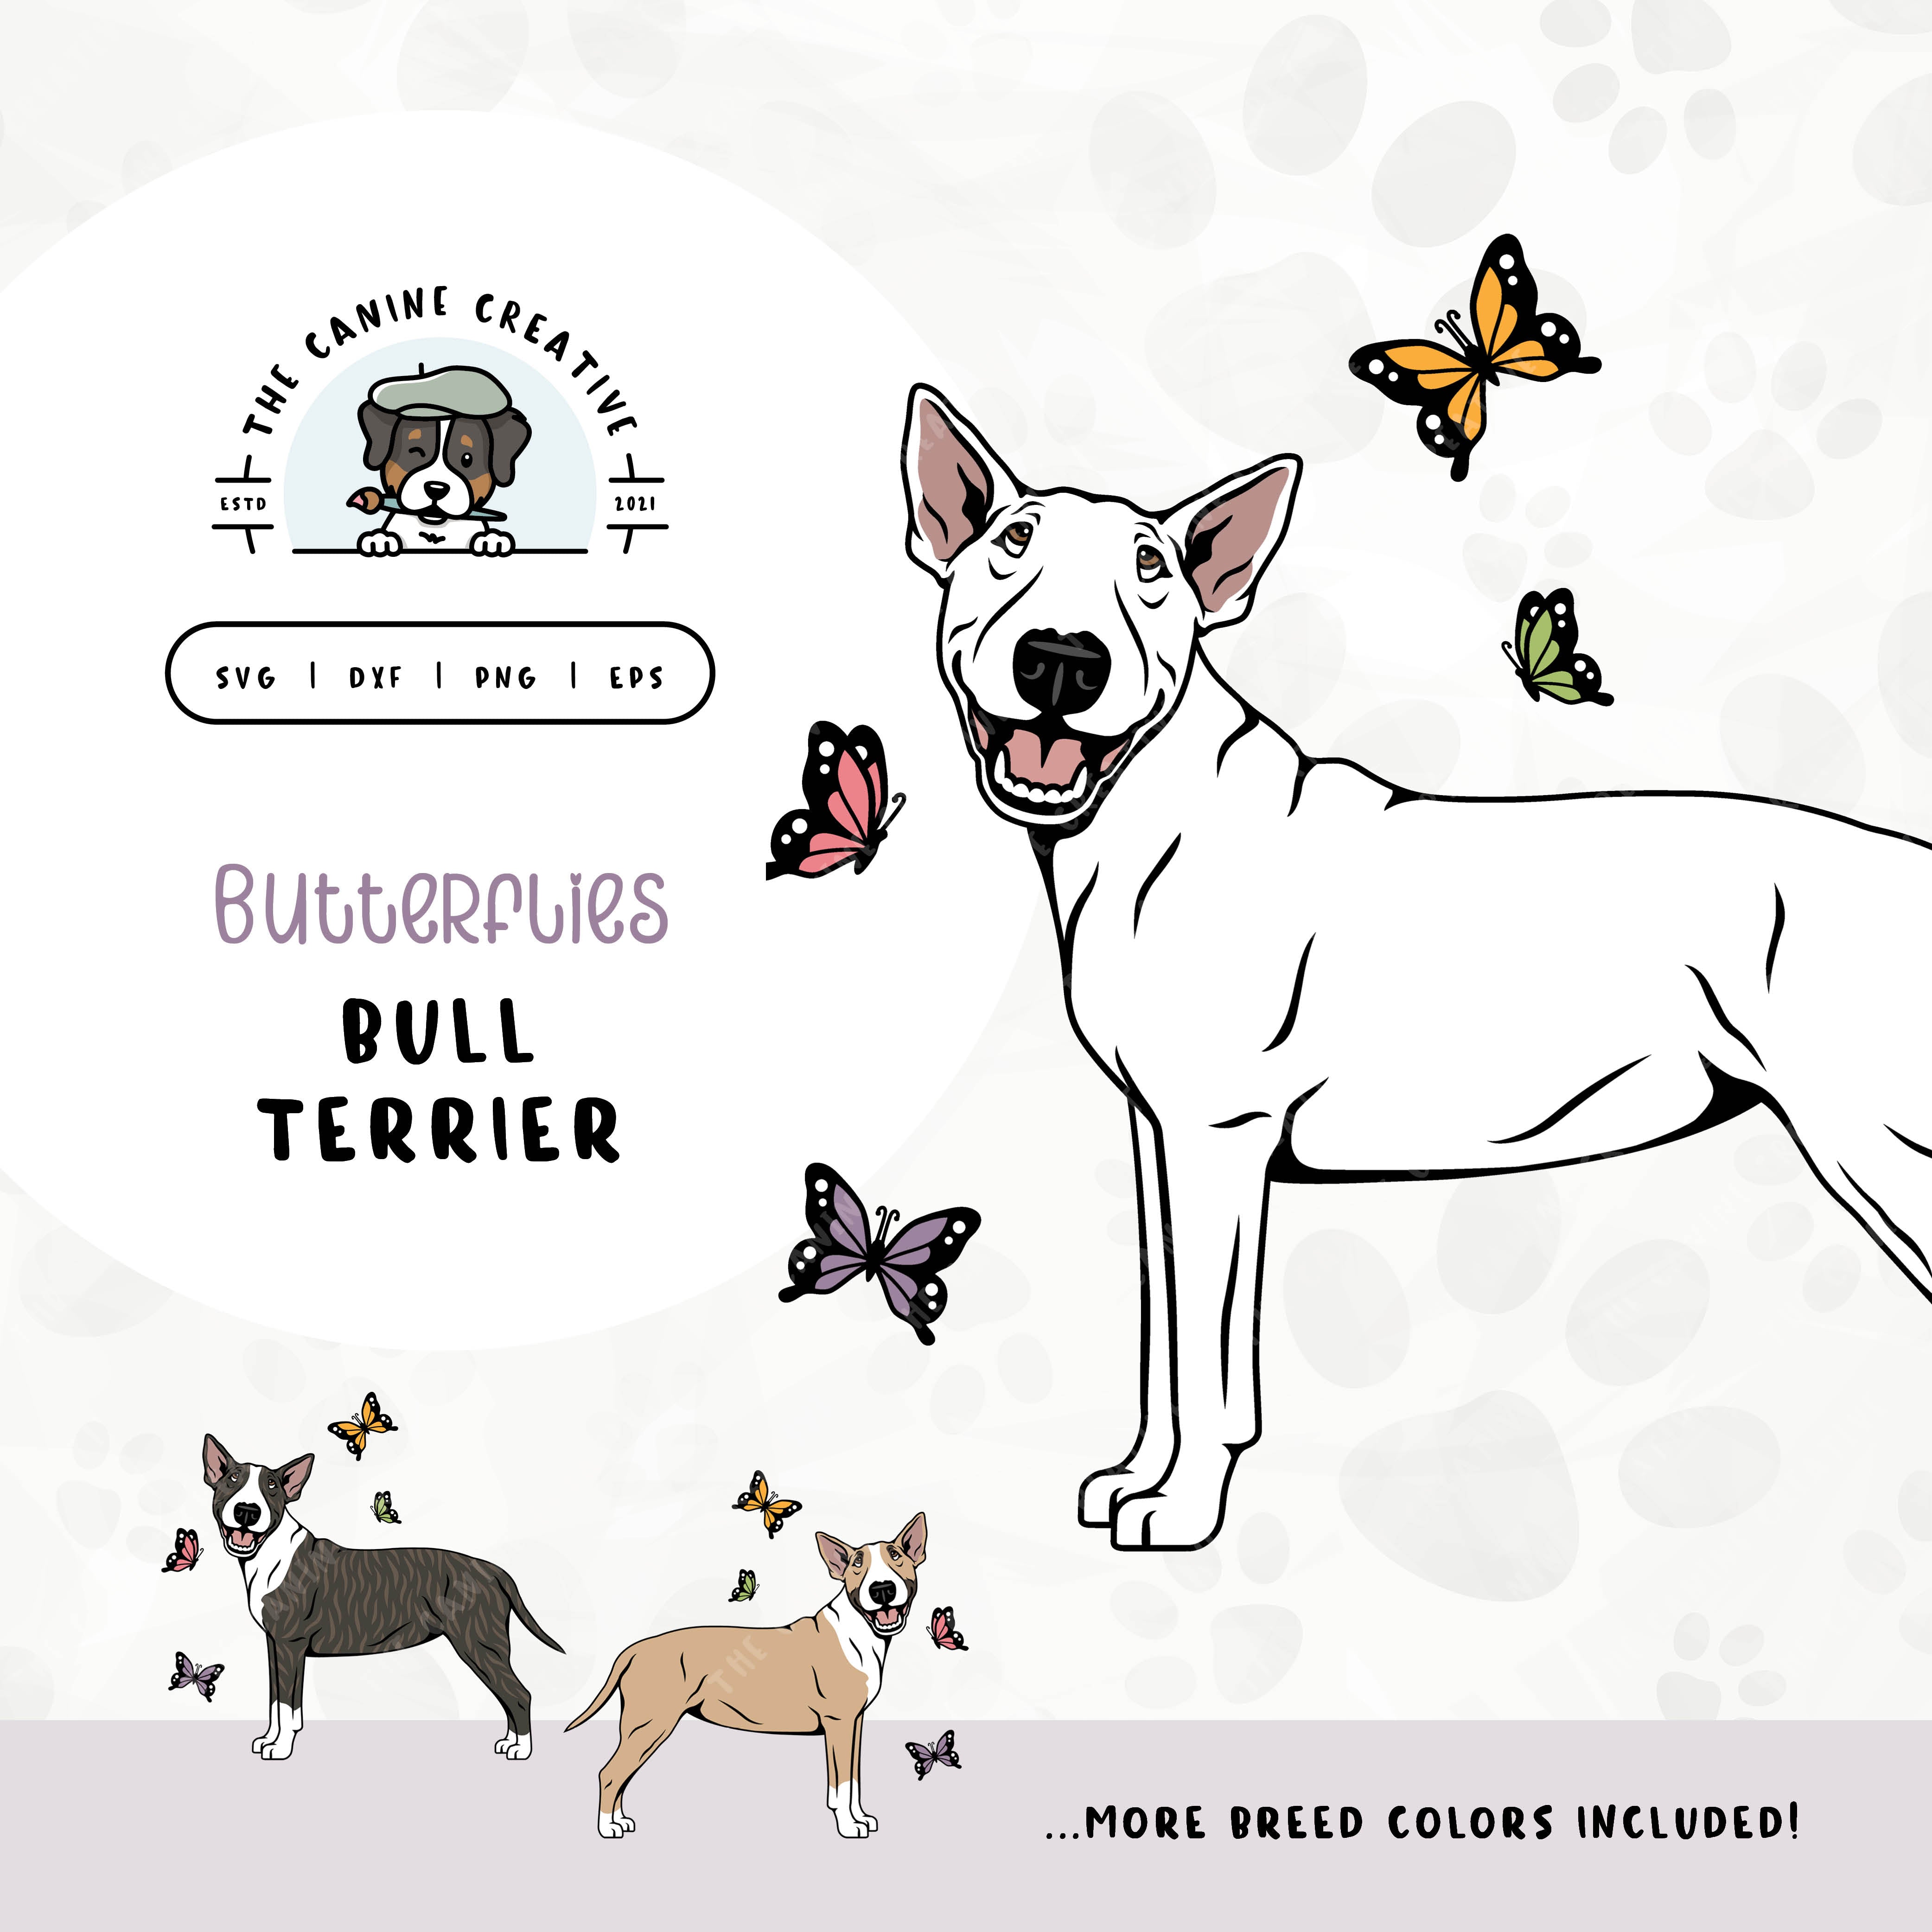 This springtime illustration features a Bull Terrier among colorful butterflies. File formats include: SVG, DXF, PNG, and EPS.